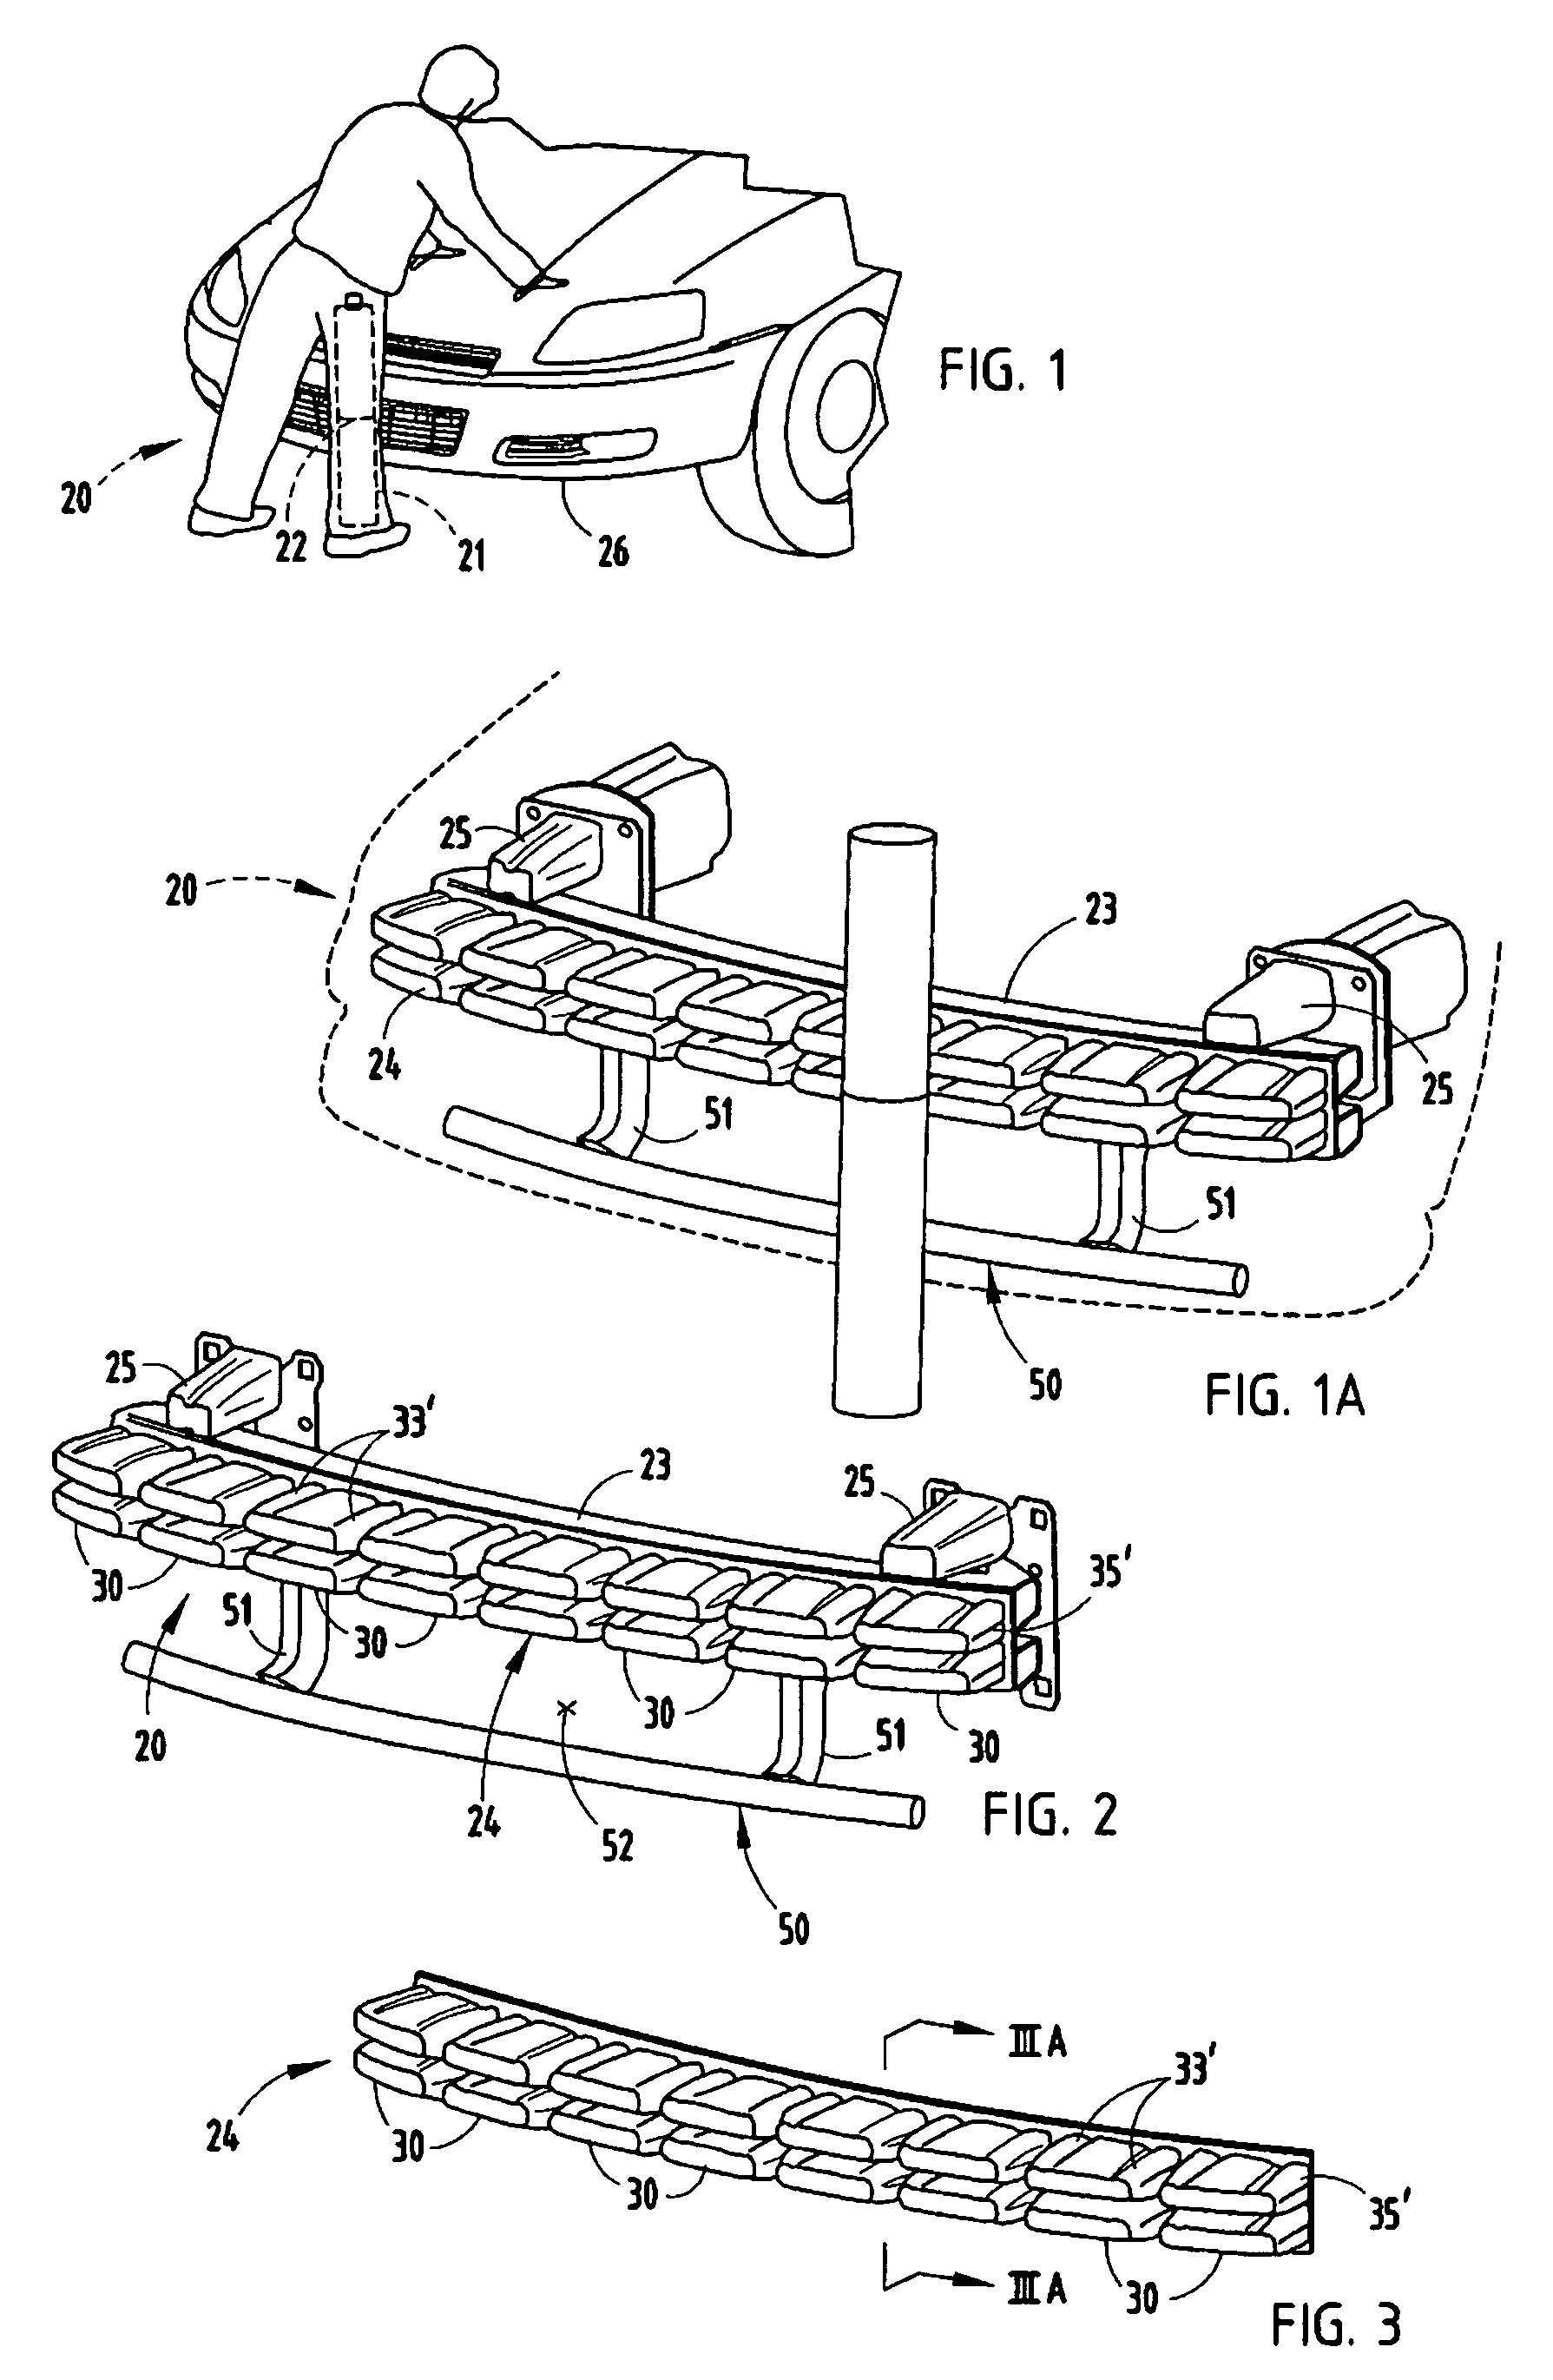 Bumper for pedestrian impact having thermoformed energy absorber